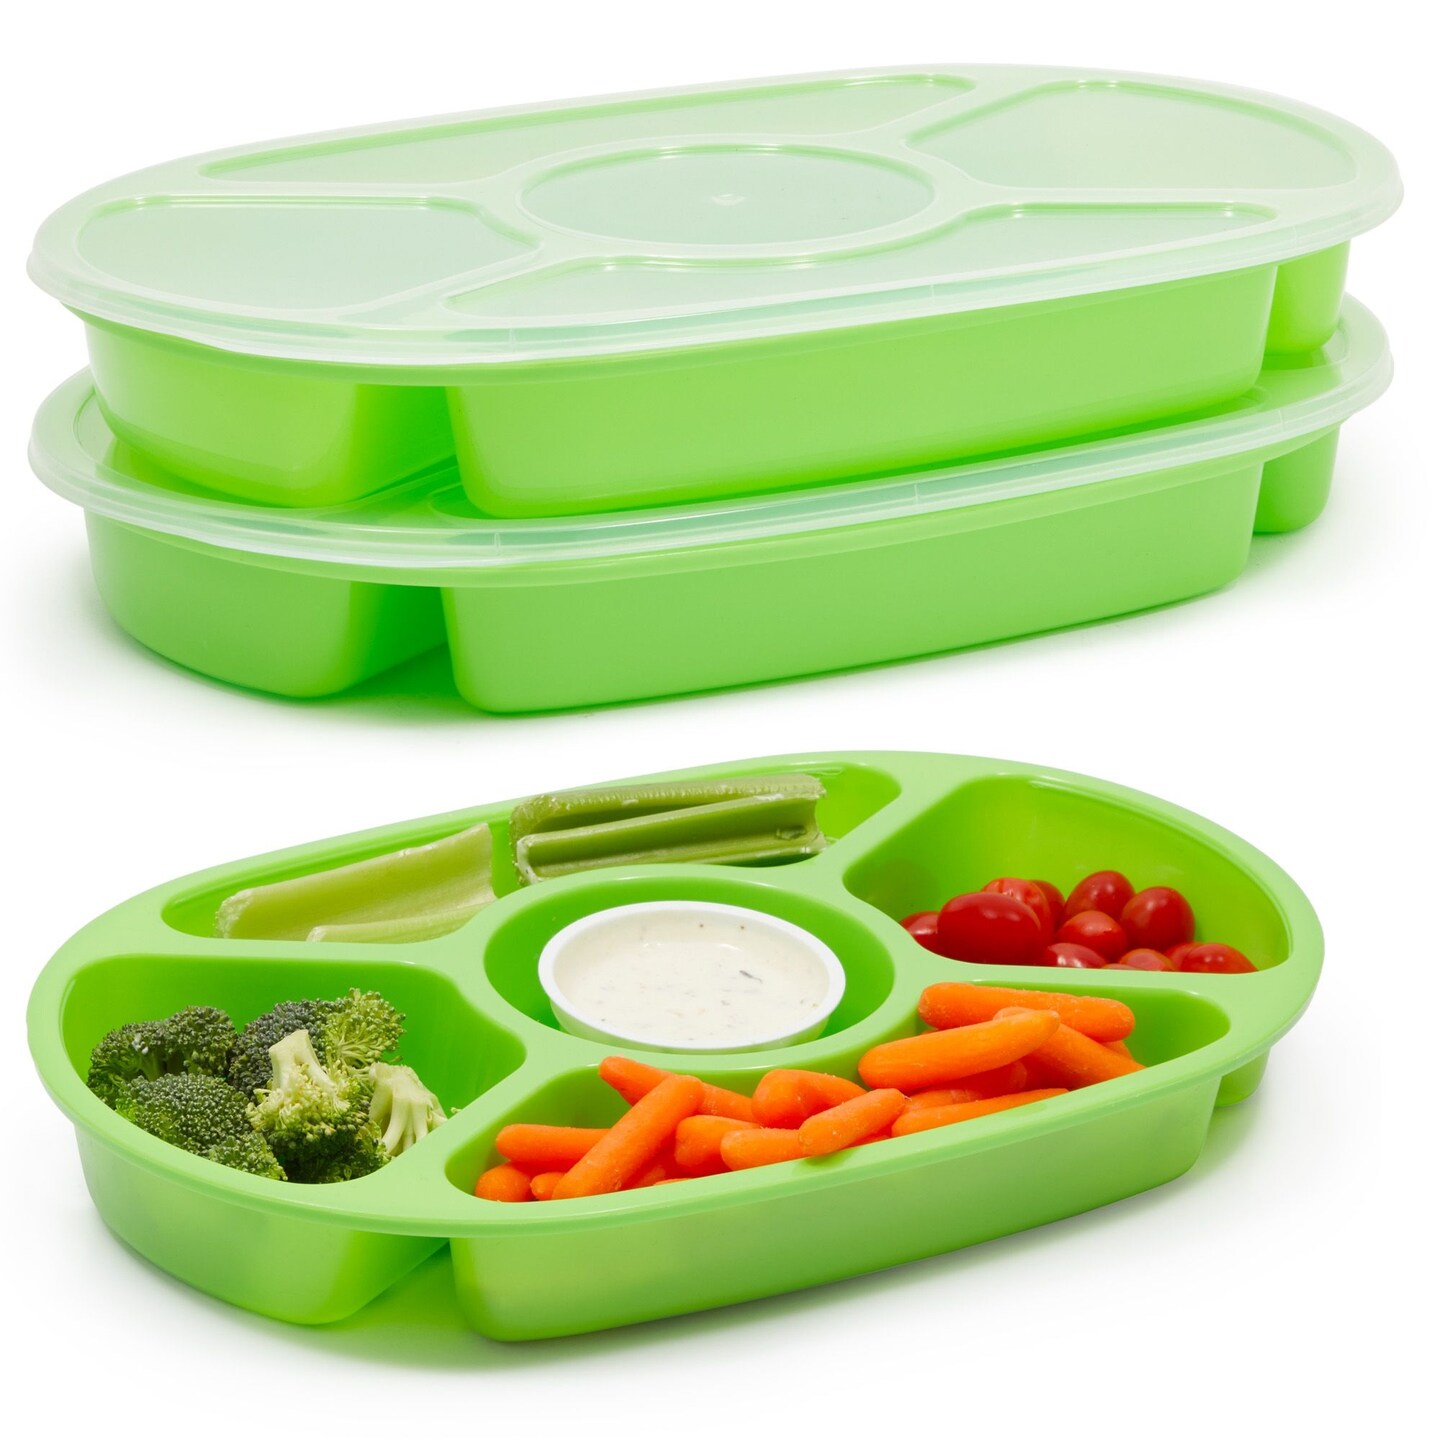 shopwithgreen Divided Serving Tray with Lid, Removable Divided